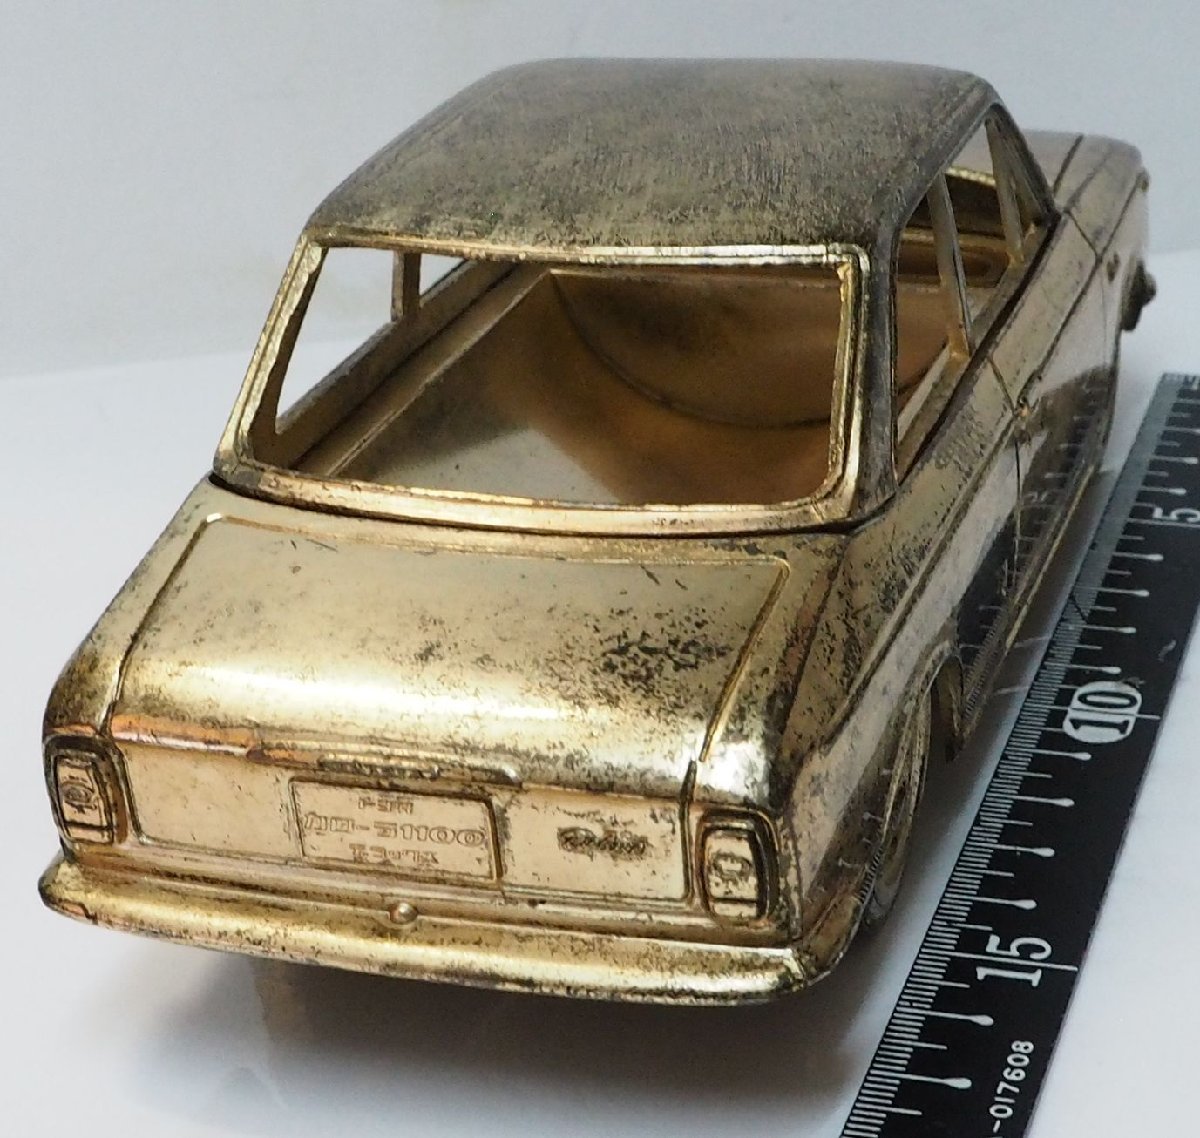  dealer [ Toyota Corolla 1100 Deluxe TOYOTA COROLLA DELUXE window parts missing ] cigarette case made of metal cigar case ornament [ box less ]0765